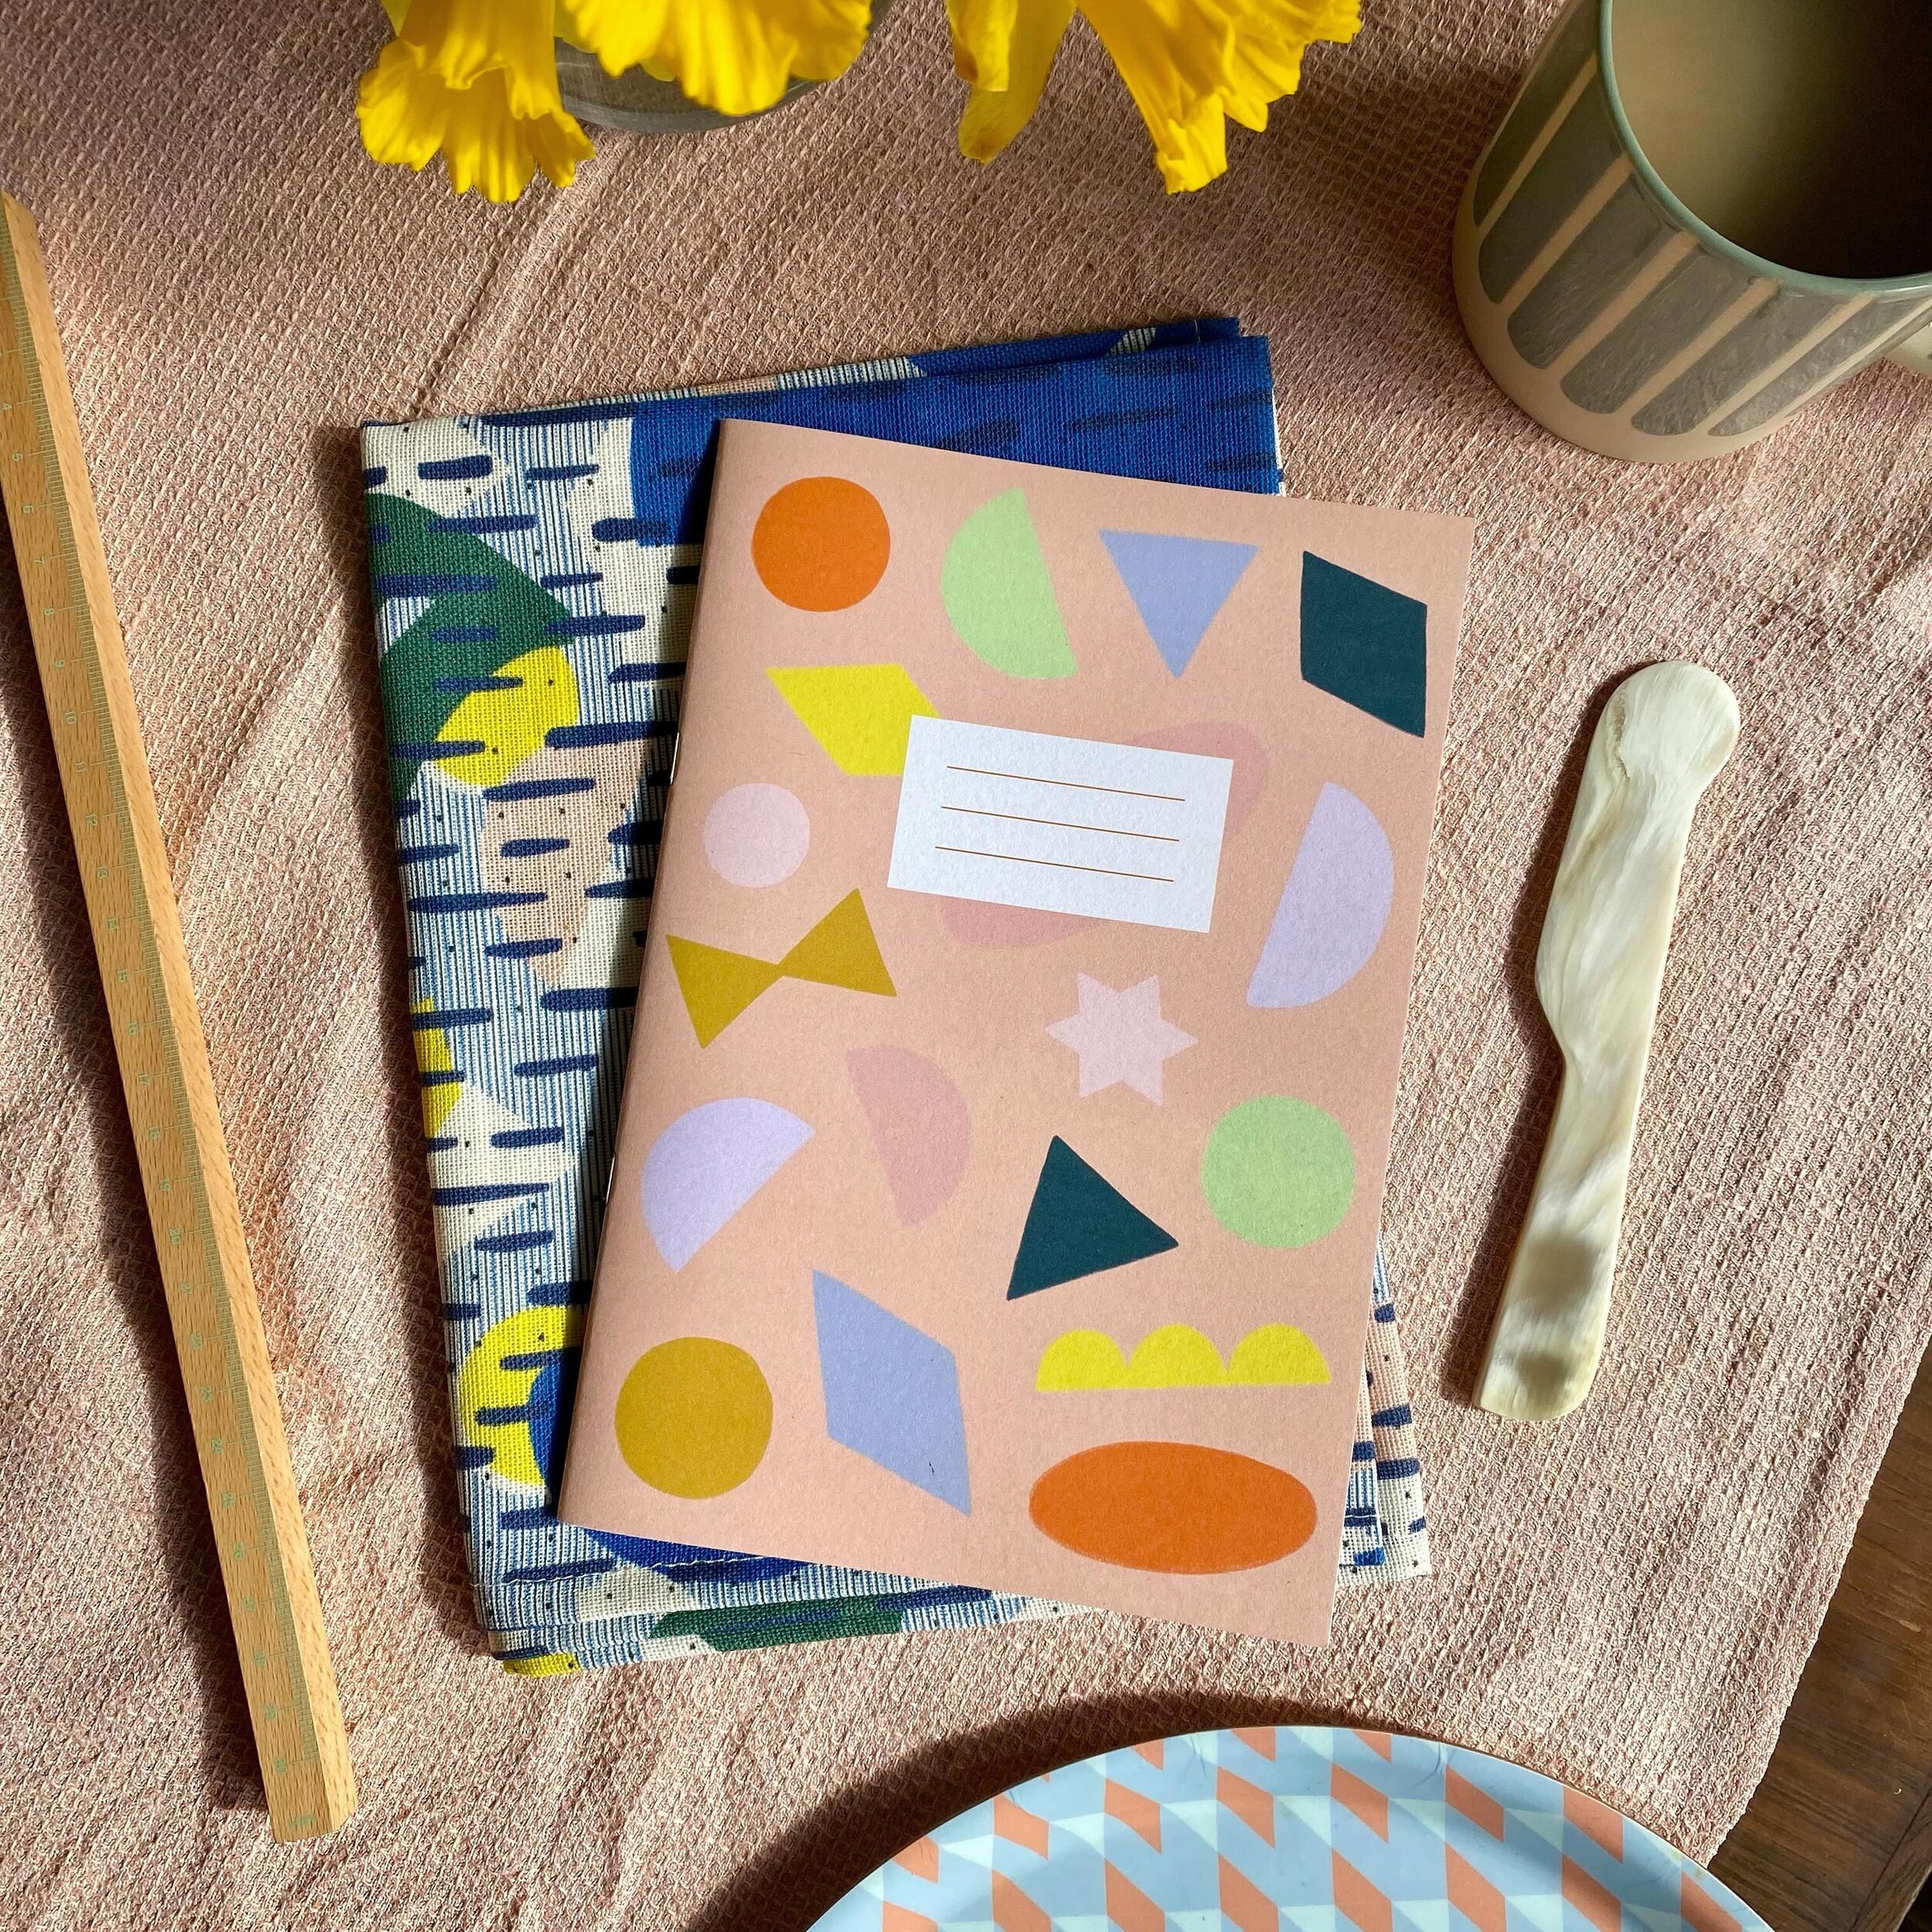 🟡 Small create business owner help please! Does anyone here know how I can offer a free gift with purchase on Squarespace?

I&rsquo;d really like to celebrate Spring and Easter by offering a free notebook with every online purchase of Lizzie for SMU